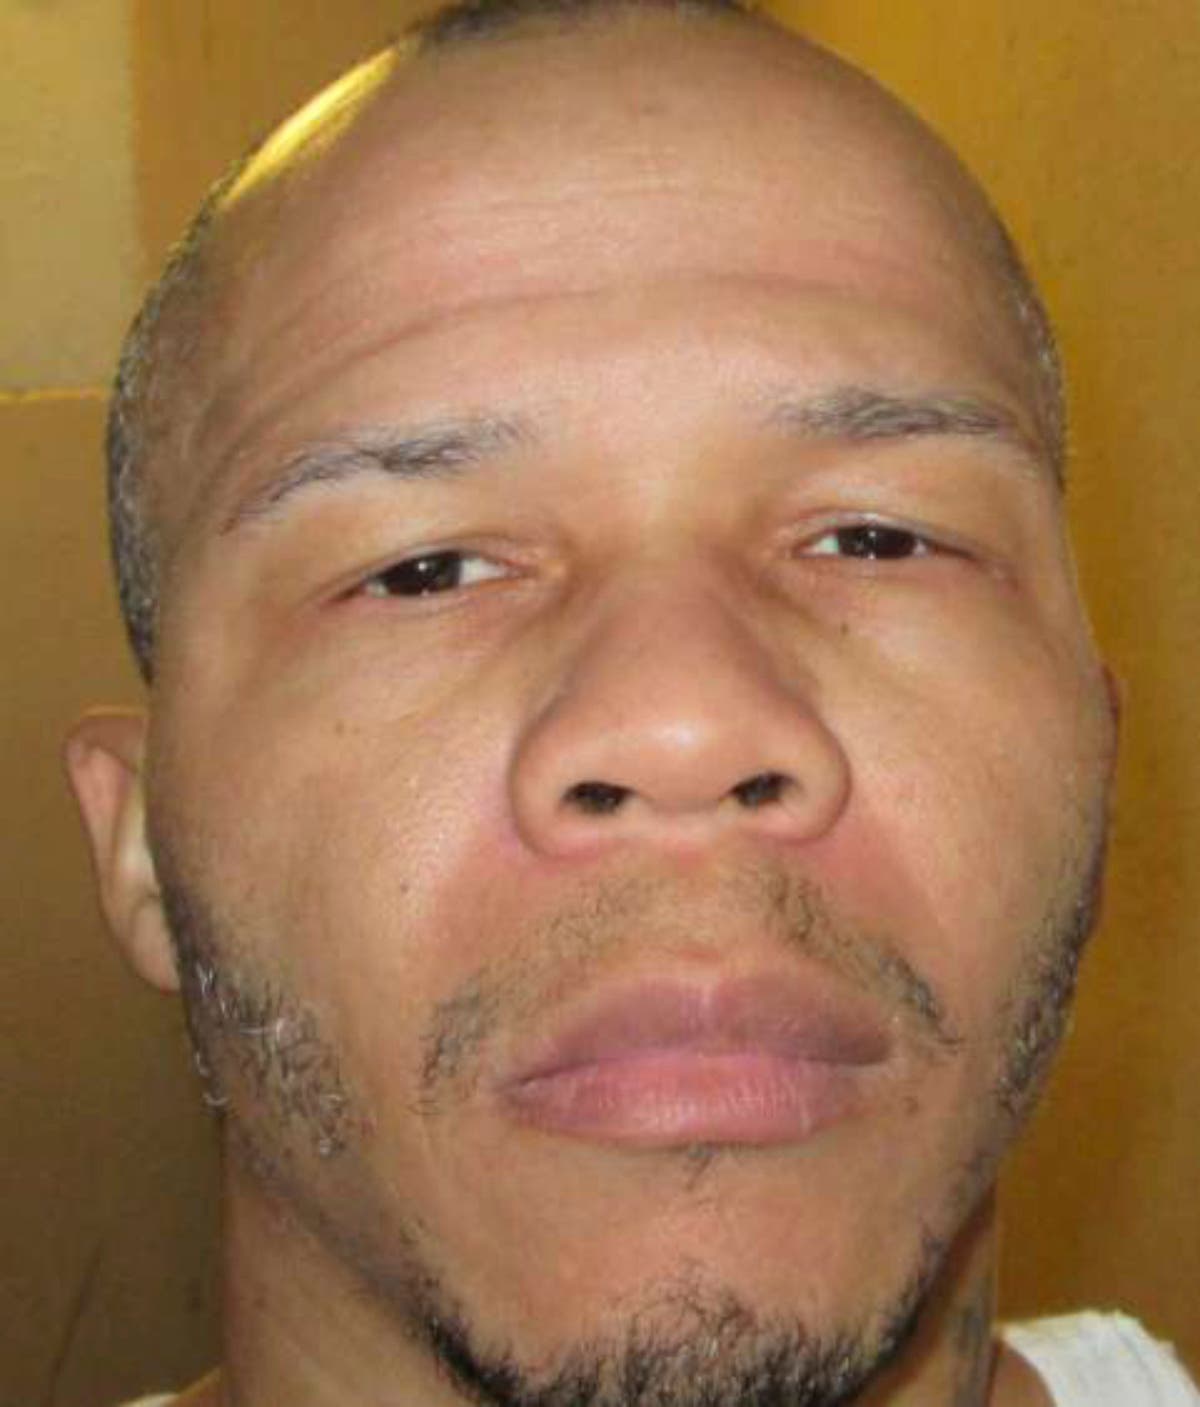 Federal appeals court blocks execution of Alabama inmate